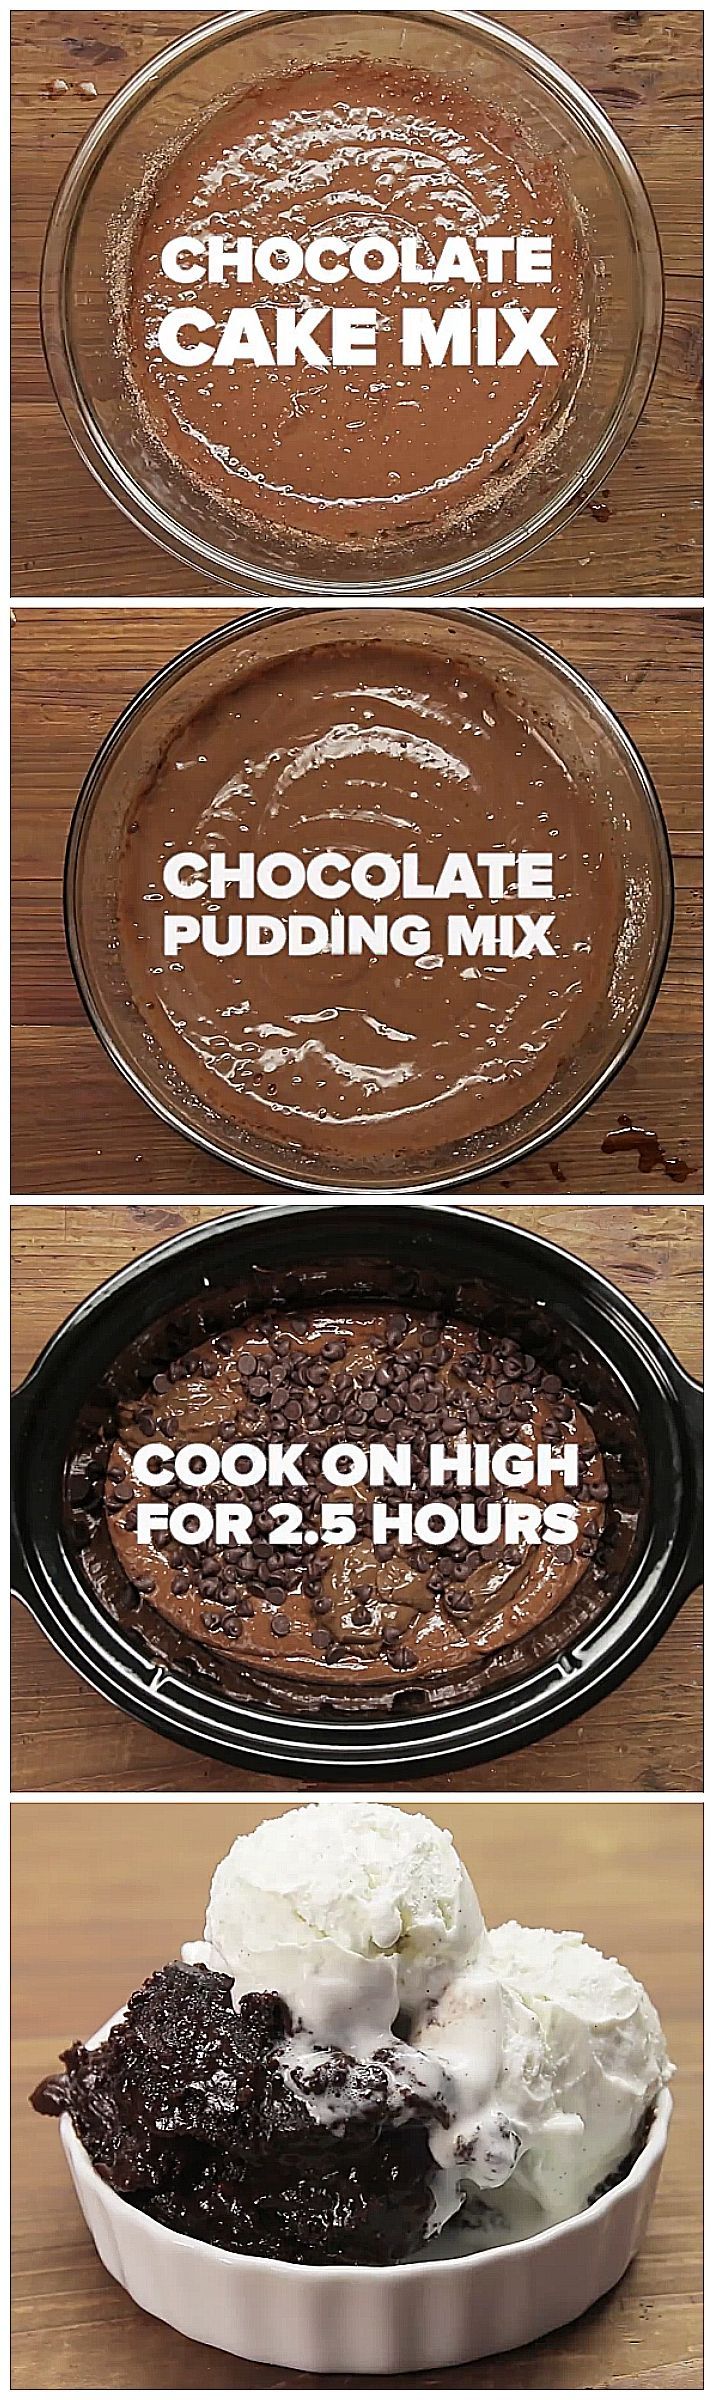 Chocolate Lava Cake/ I like the comment about using fudge icing dropped by large spoonsful instead of the pudding.